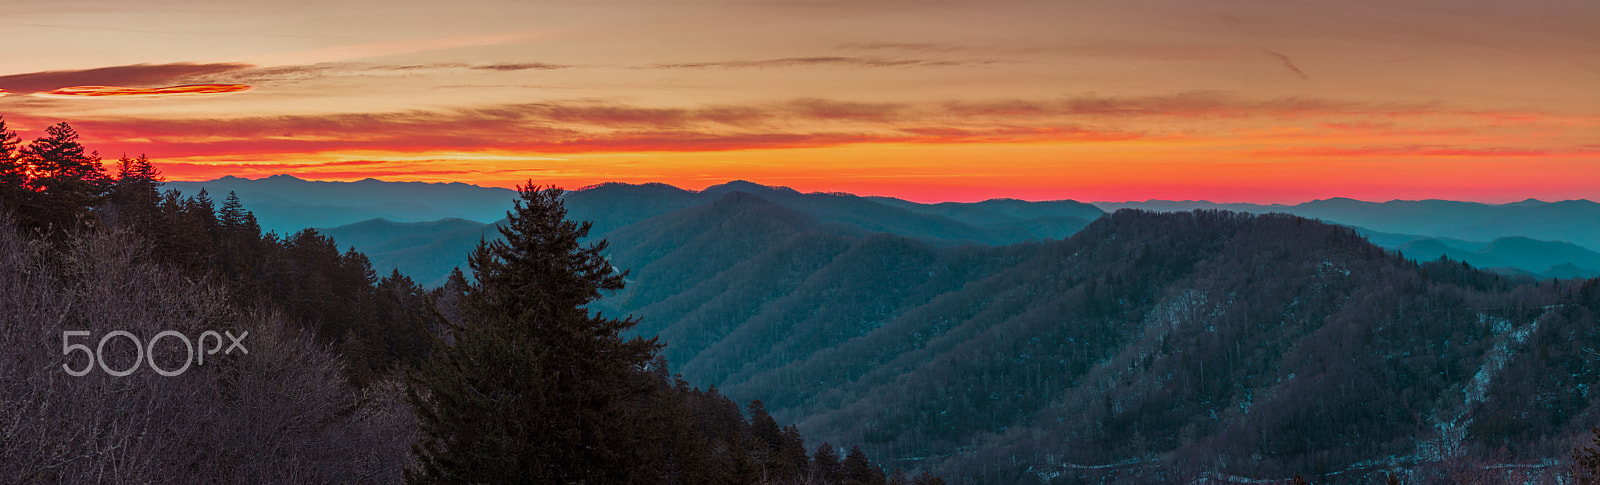 Canon EOS 5DS R sample photo. Newfound gap pano photography